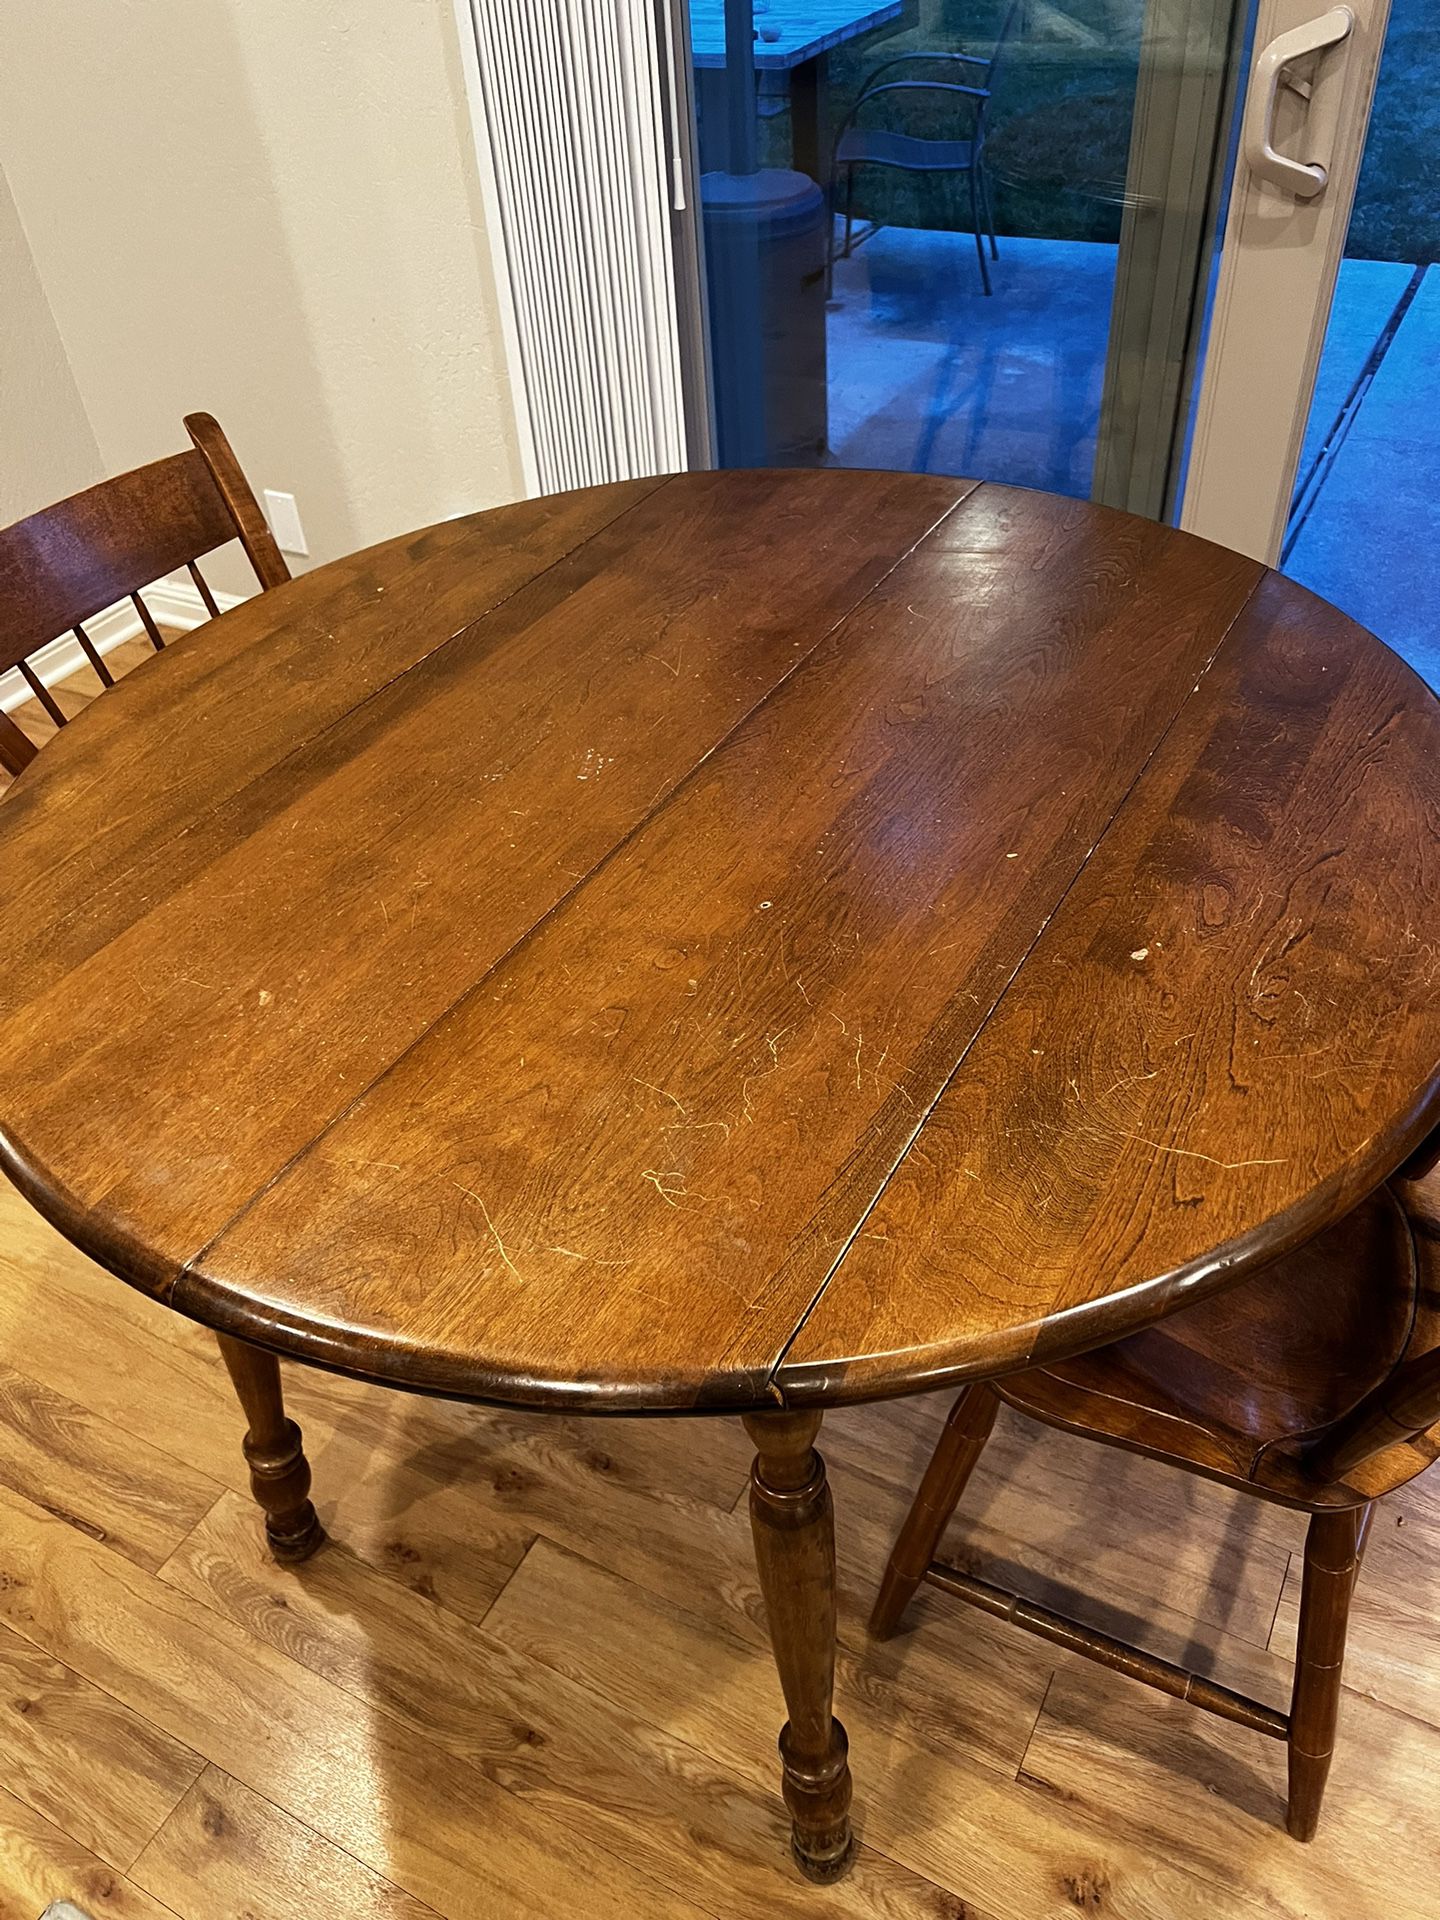 FREE table and Chairs